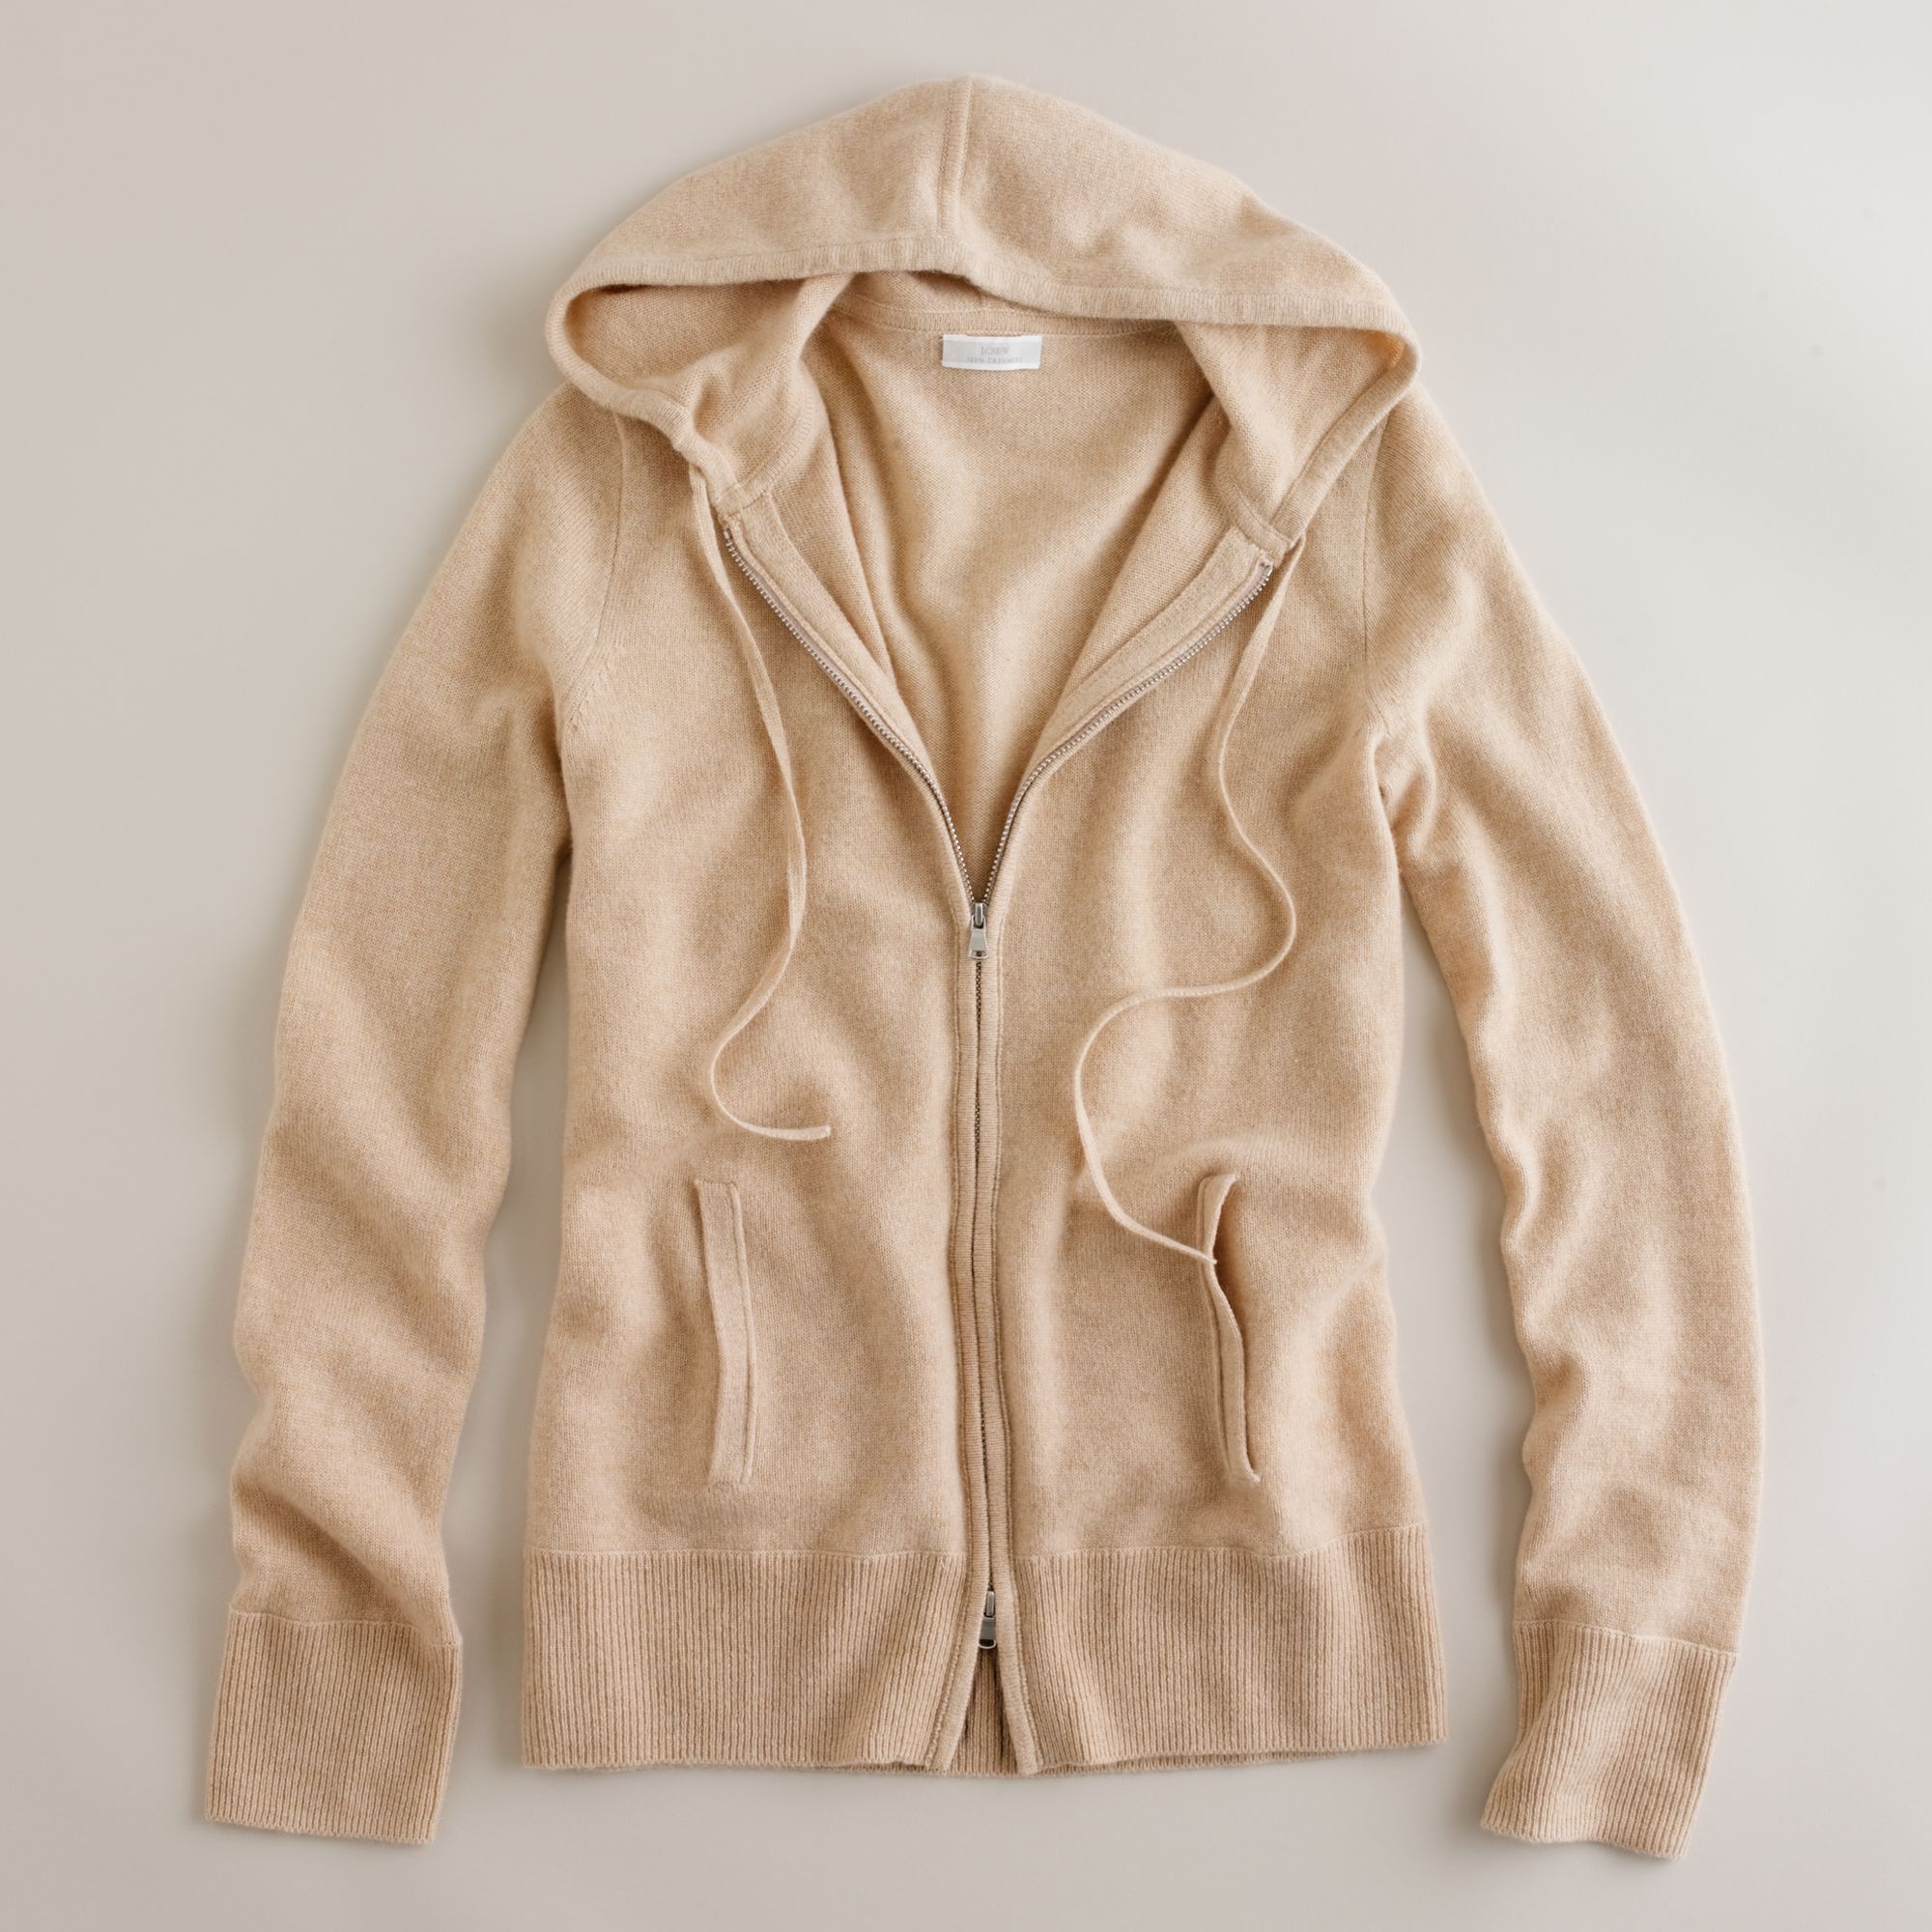 Lyst - J.Crew Collection Cashmere Zip-front Hoodie in Natural